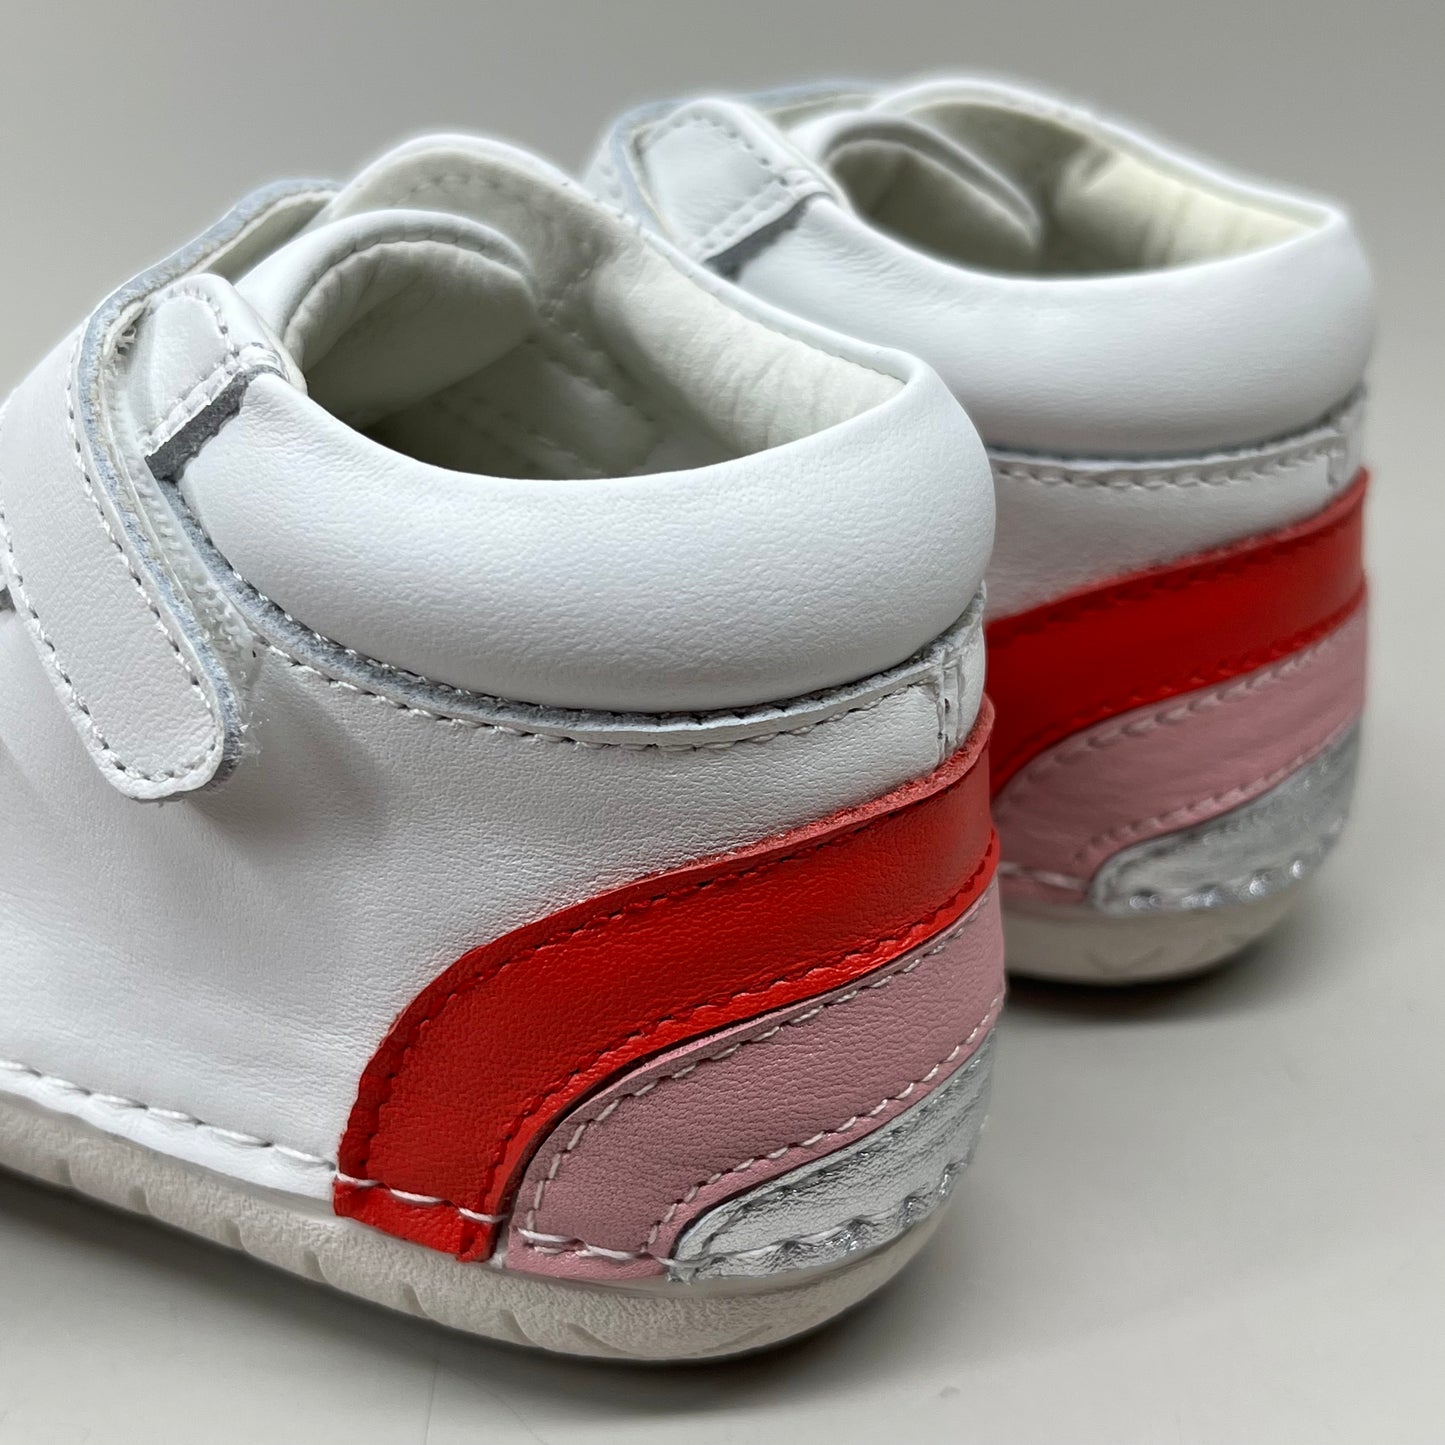 OLD SOLES Baby Champster Leather Shoe Sz 21 US 5 Snow/Red/ Pink/Silver #4091